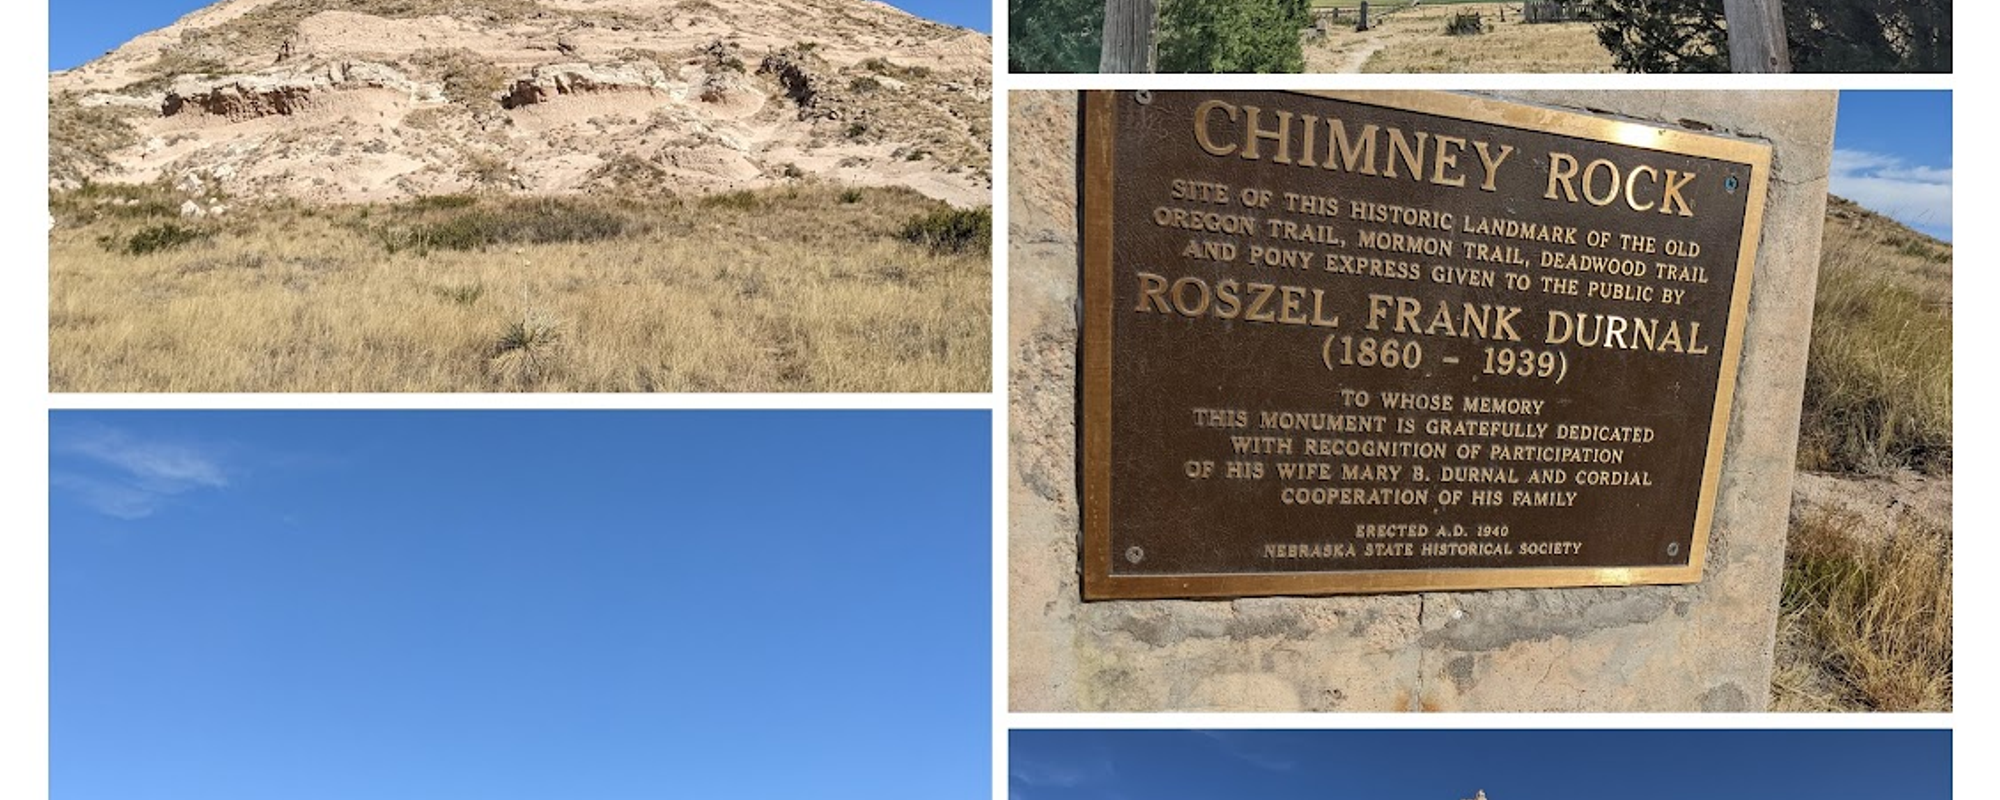 2022 Senstless Family Road Trip  Day 9 -  Chimney Rock and Lots of Driving!